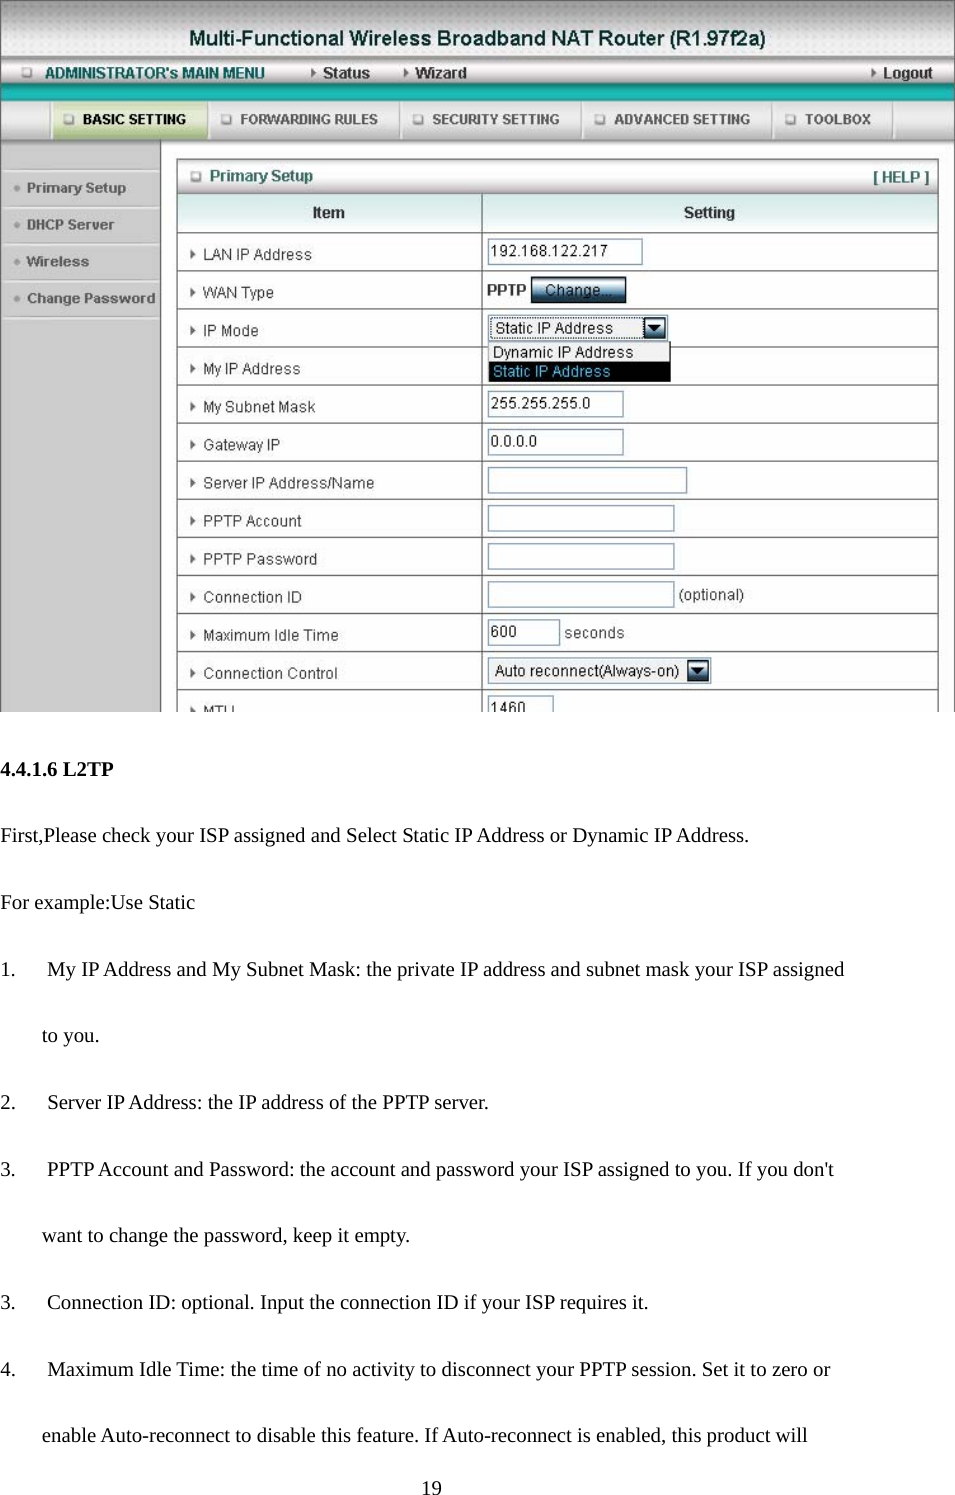  19  4.4.1.6 L2TP First,Please check your ISP assigned and Select Static IP Address or Dynamic IP Address. For example:Use Static 1.      My IP Address and My Subnet Mask: the private IP address and subnet mask your ISP assigned   to you.   2.    Server IP Address: the IP address of the PPTP server.   3.      PPTP Account and Password: the account and password your ISP assigned to you. If you don&apos;t want to change the password, keep it empty.   3.      Connection ID: optional. Input the connection ID if your ISP requires it.   4.      Maximum Idle Time: the time of no activity to disconnect your PPTP session. Set it to zero or   enable Auto-reconnect to disable this feature. If Auto-reconnect is enabled, this product will   